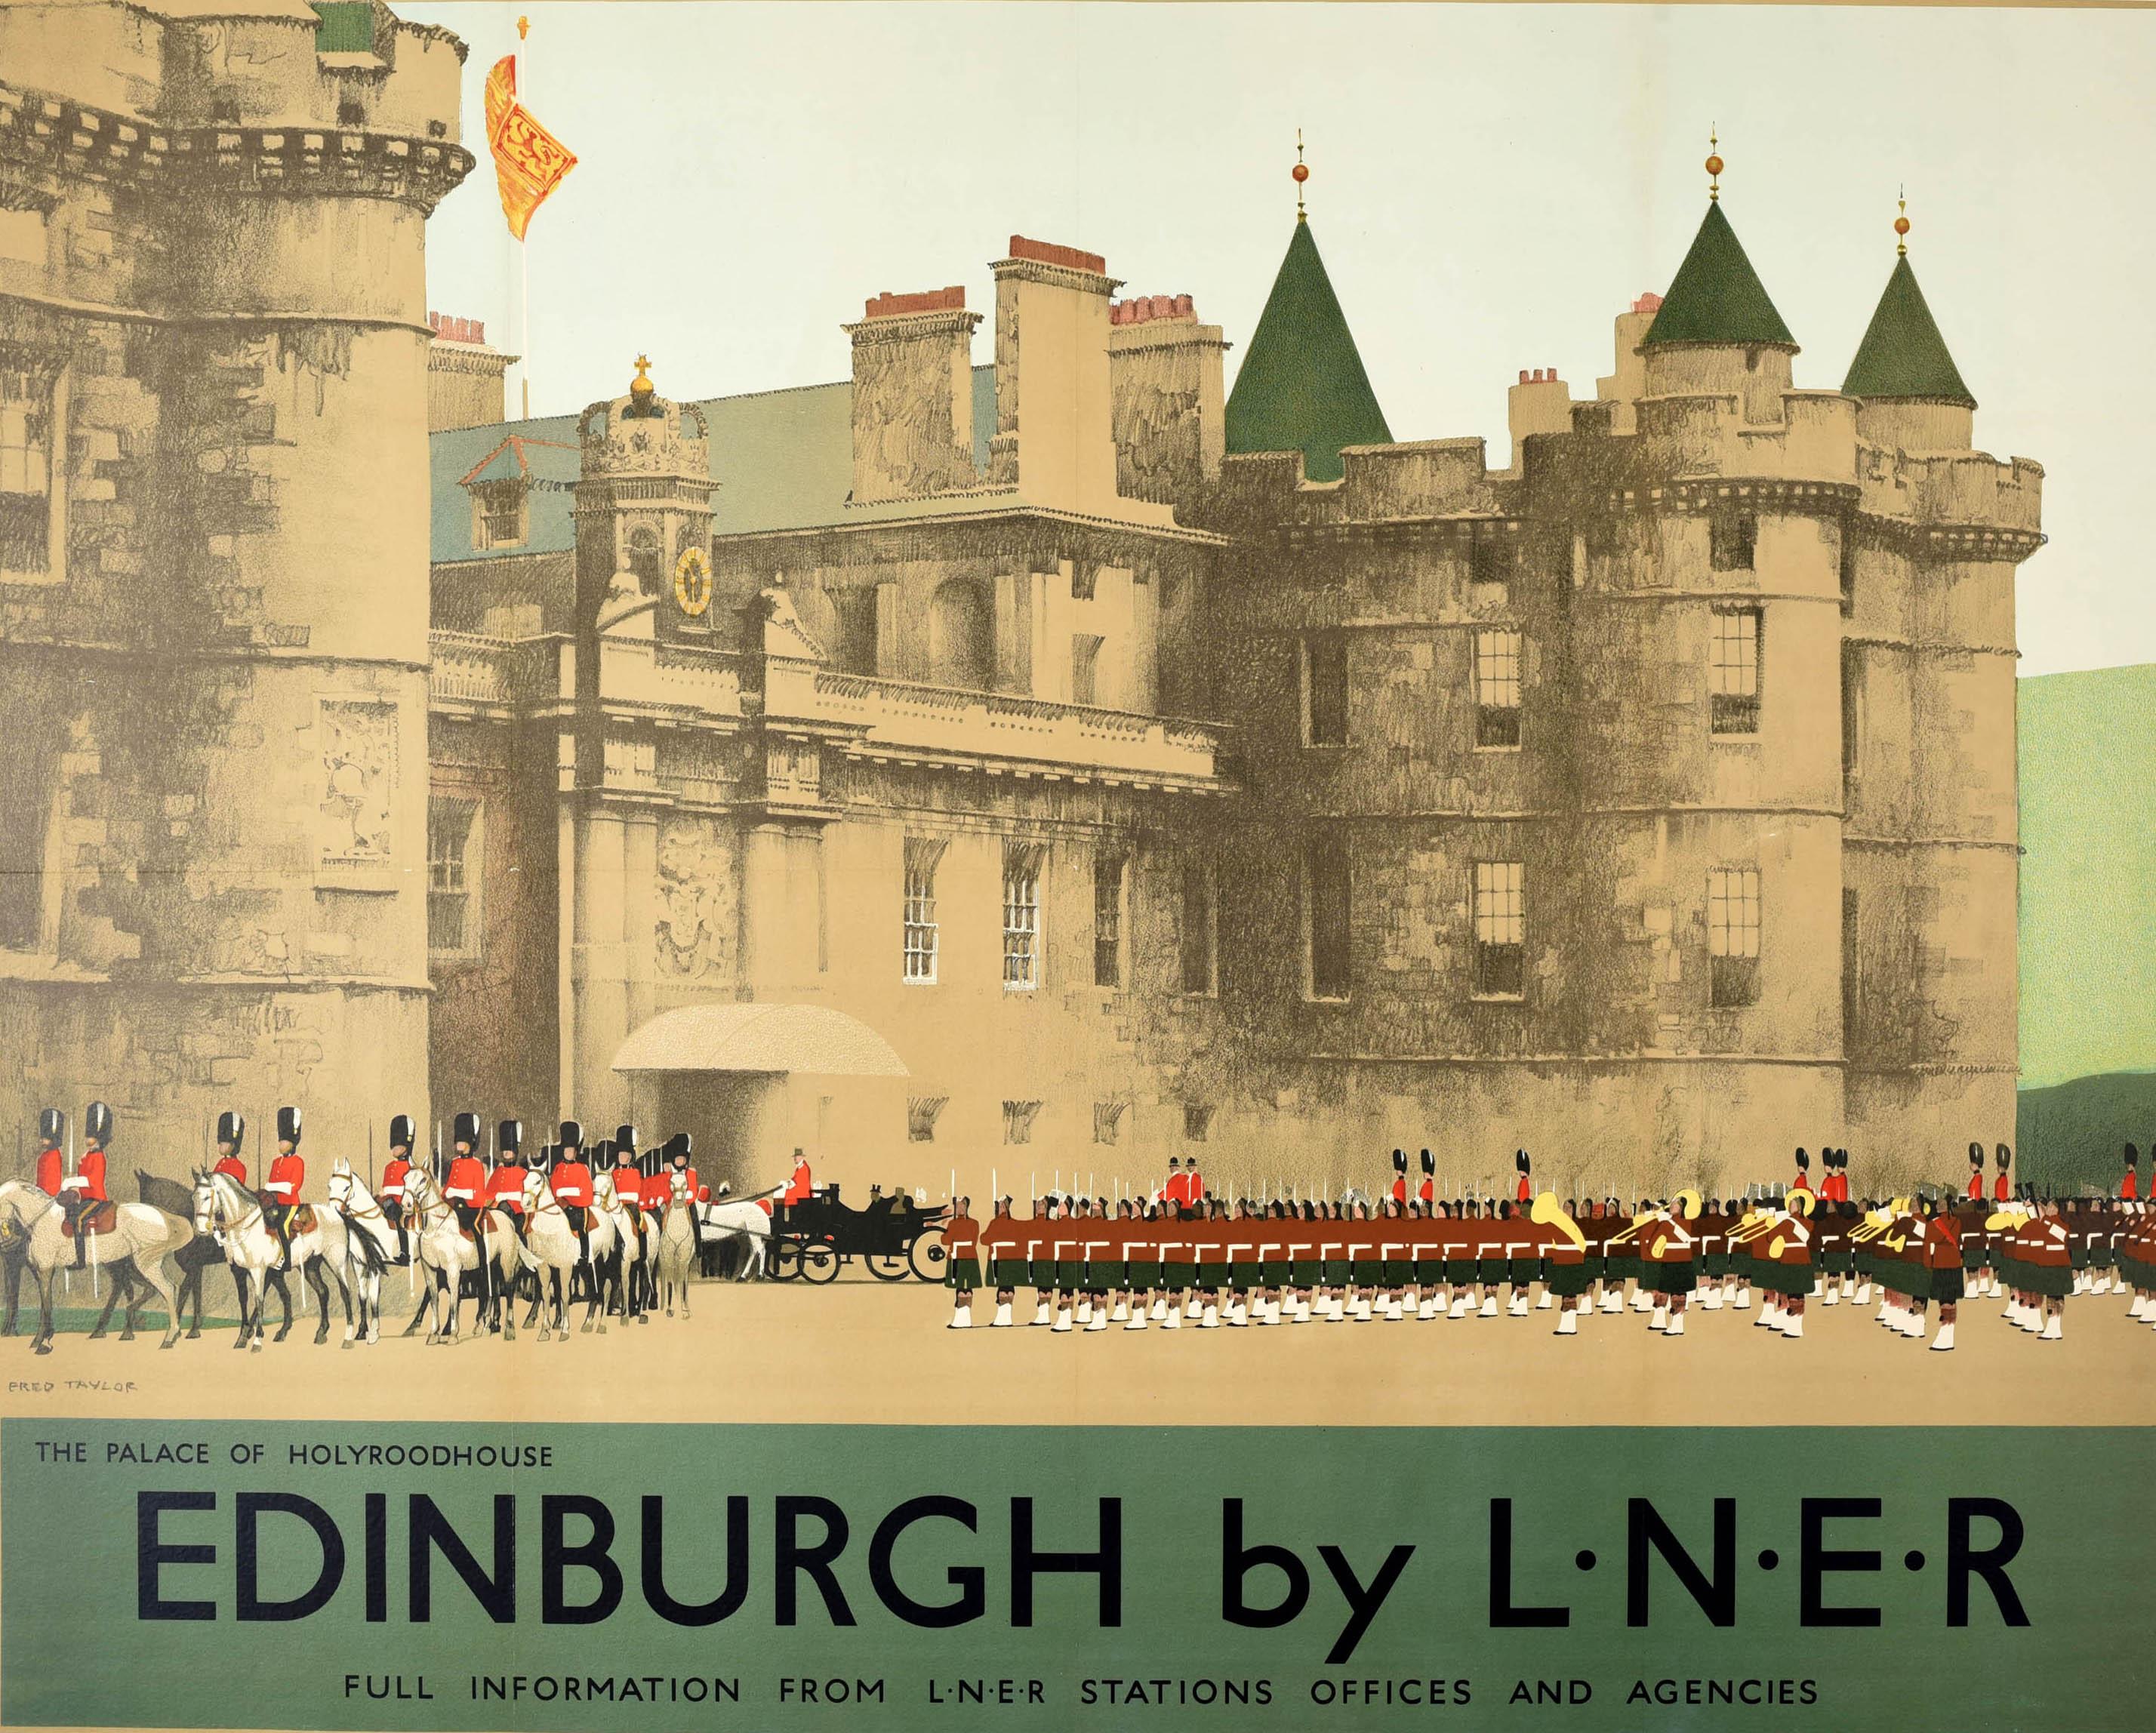 Original vintage train travel poster for Edinburgh by LNER London and North Eastern Railway featuring artwork by Fred Taylor (1875-1963) depicting a royal ceremony at The Palace of Holyroodhouse in Scotland with guards on horses and standing to